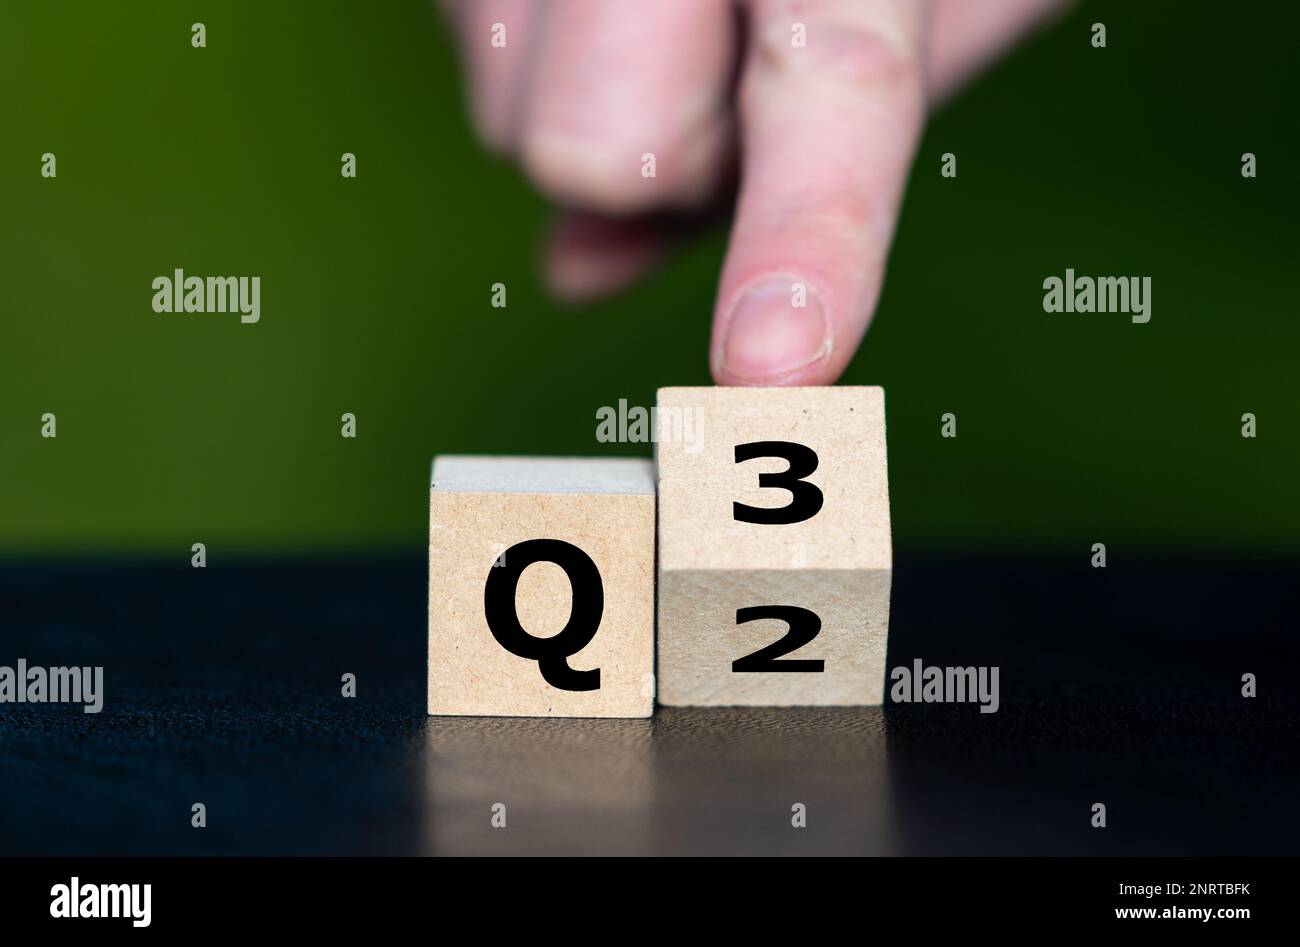 Symbol for the 3rd Quarter of the year. Hand turns dice and changes the expression Q2 to Q3. Stock Photo